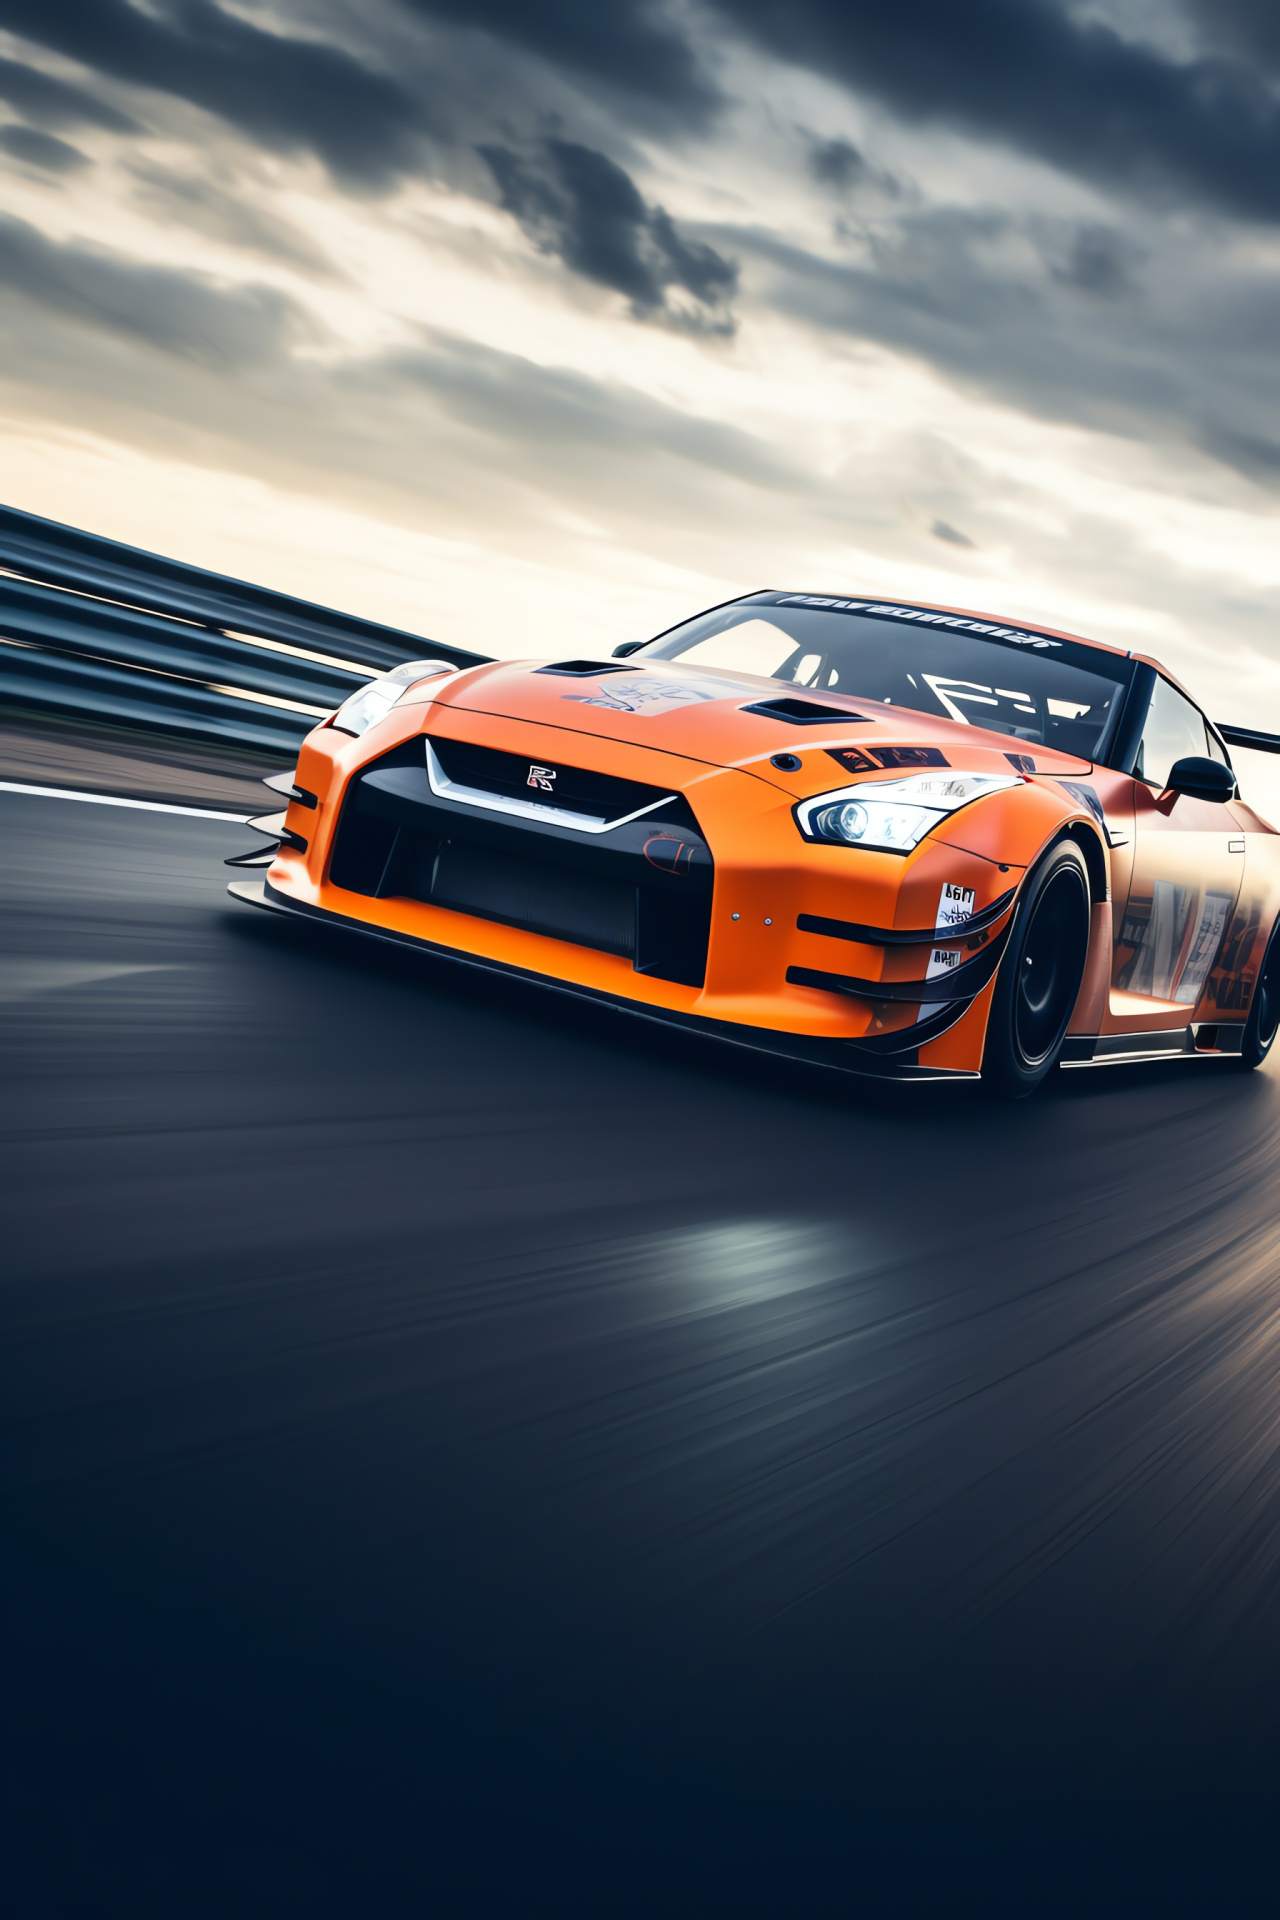 Rocket Bunny upgrade, Nissan GT-R racer, competitive speedway, overhead shot, velocity, HD Phone Image